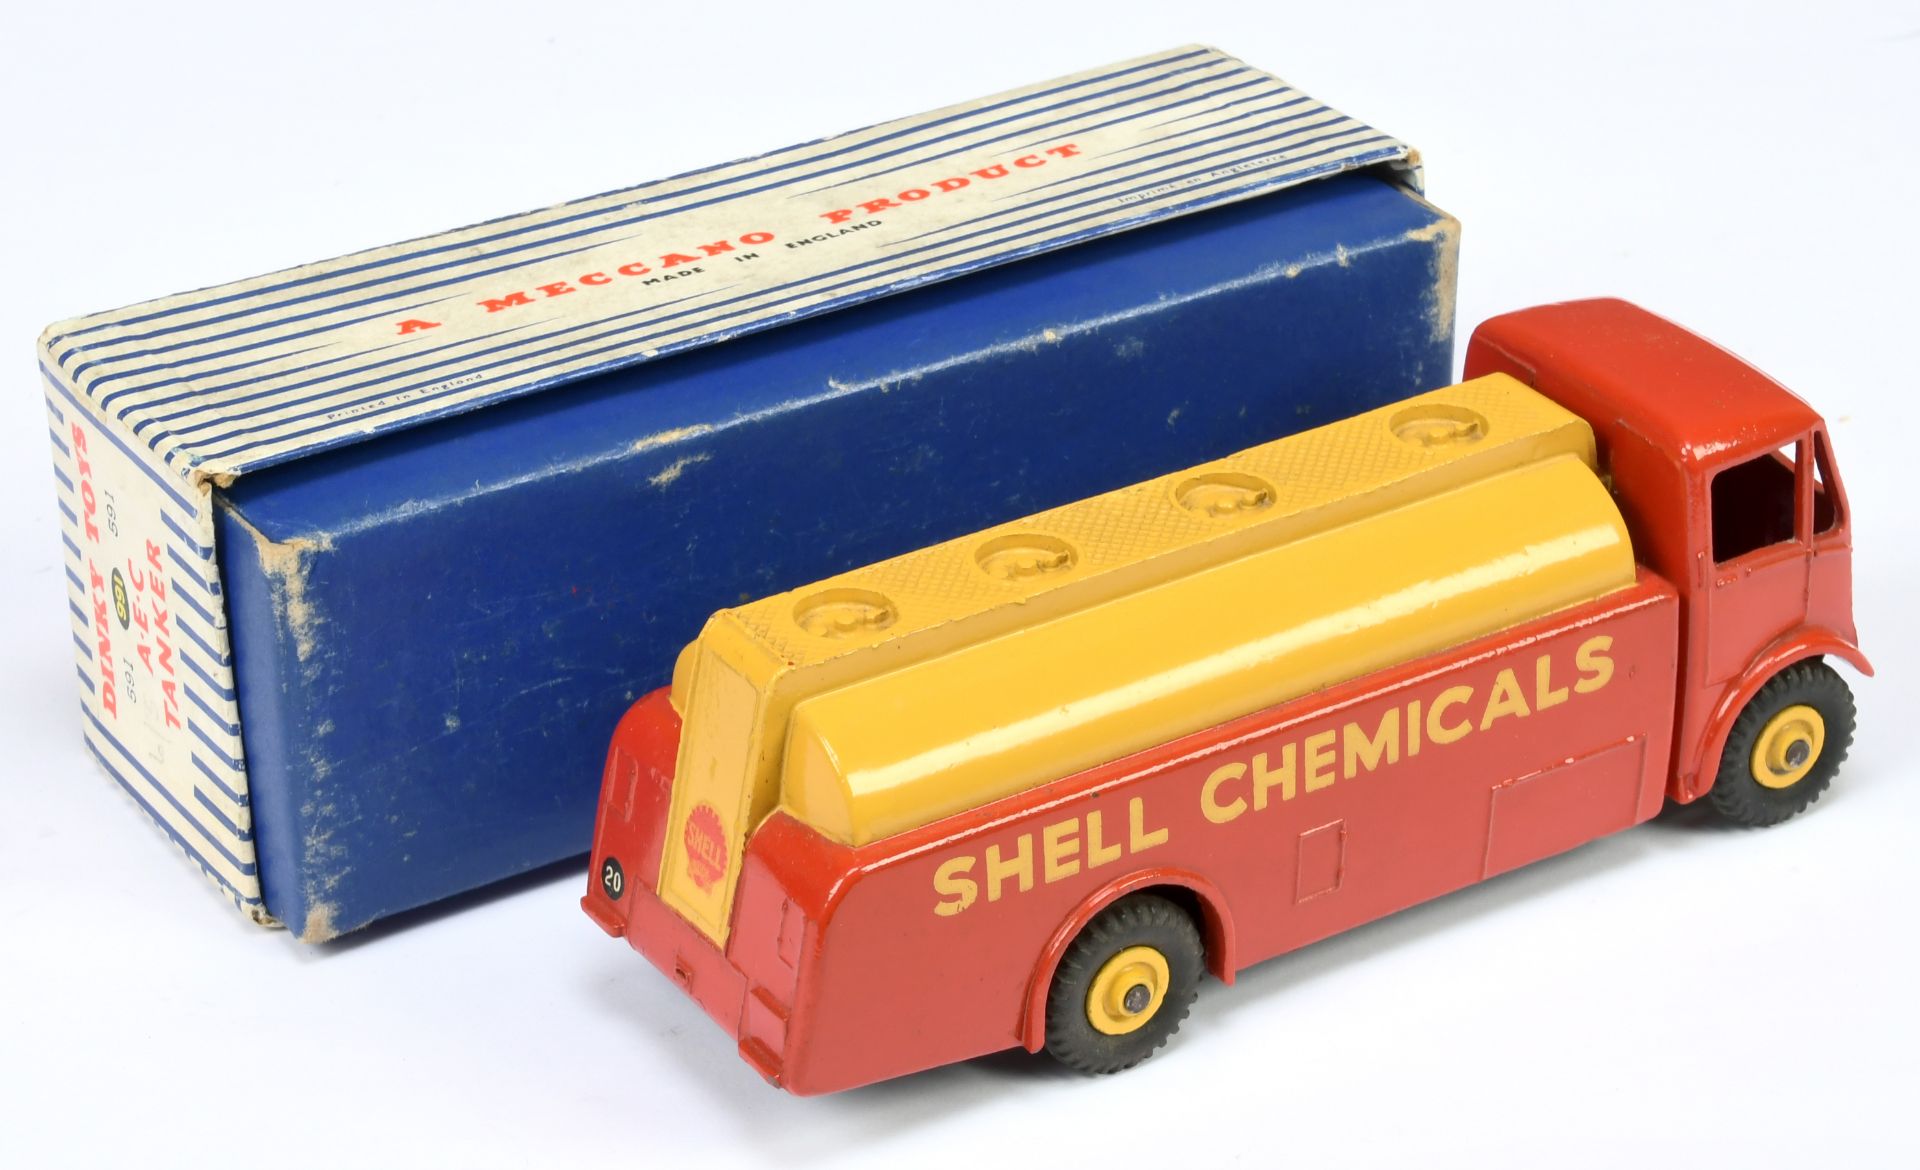 Dinky Toys 991 (591) AEC Monarch Thompson Tanker " Shell Chemicals" - Red cab and back, yellow ta... - Bild 2 aus 2